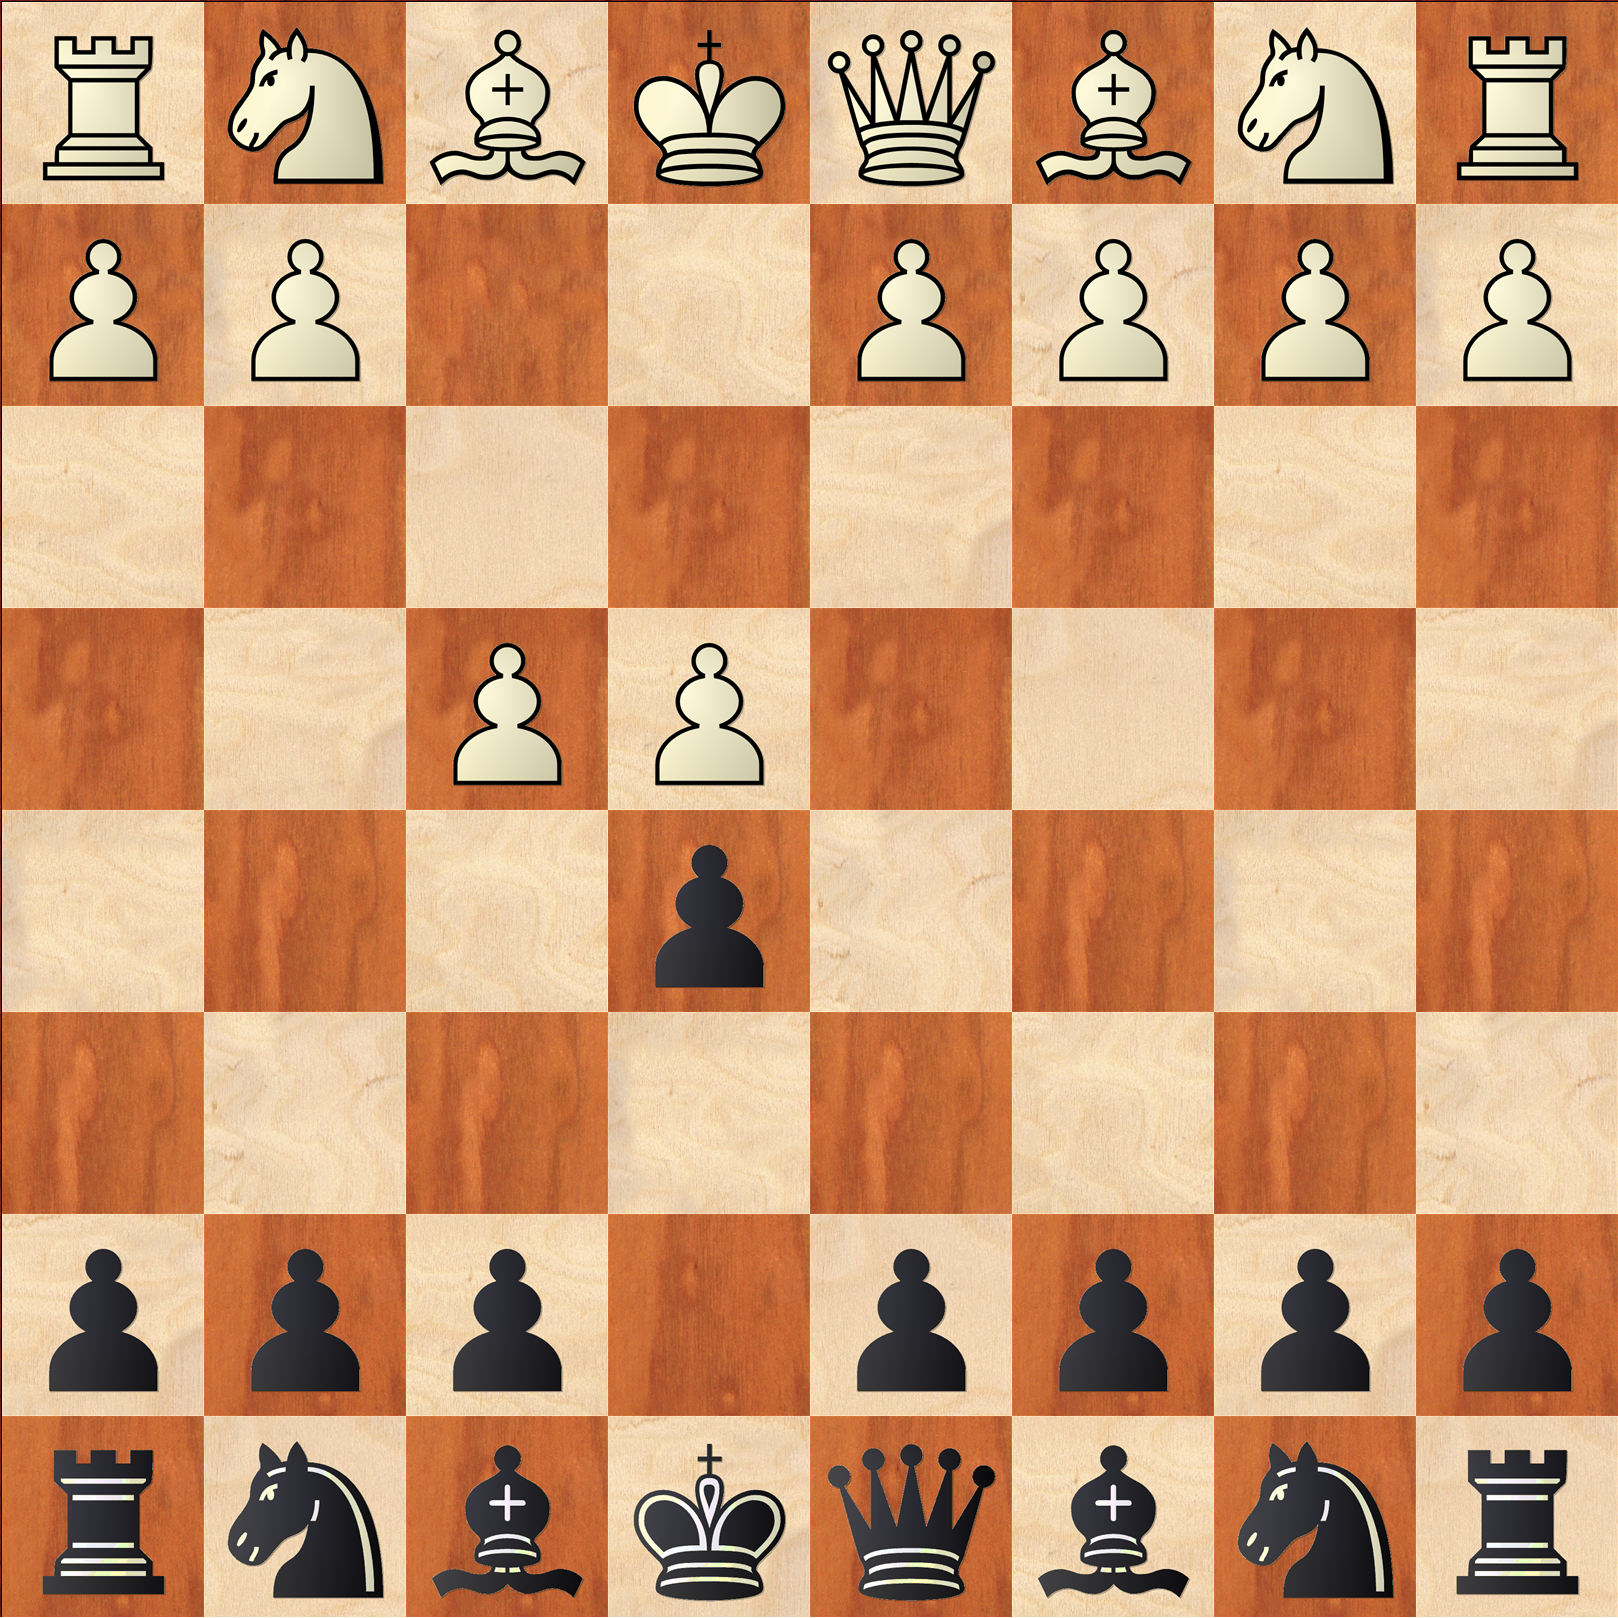 Chess Opening For Black Against King's Gambit